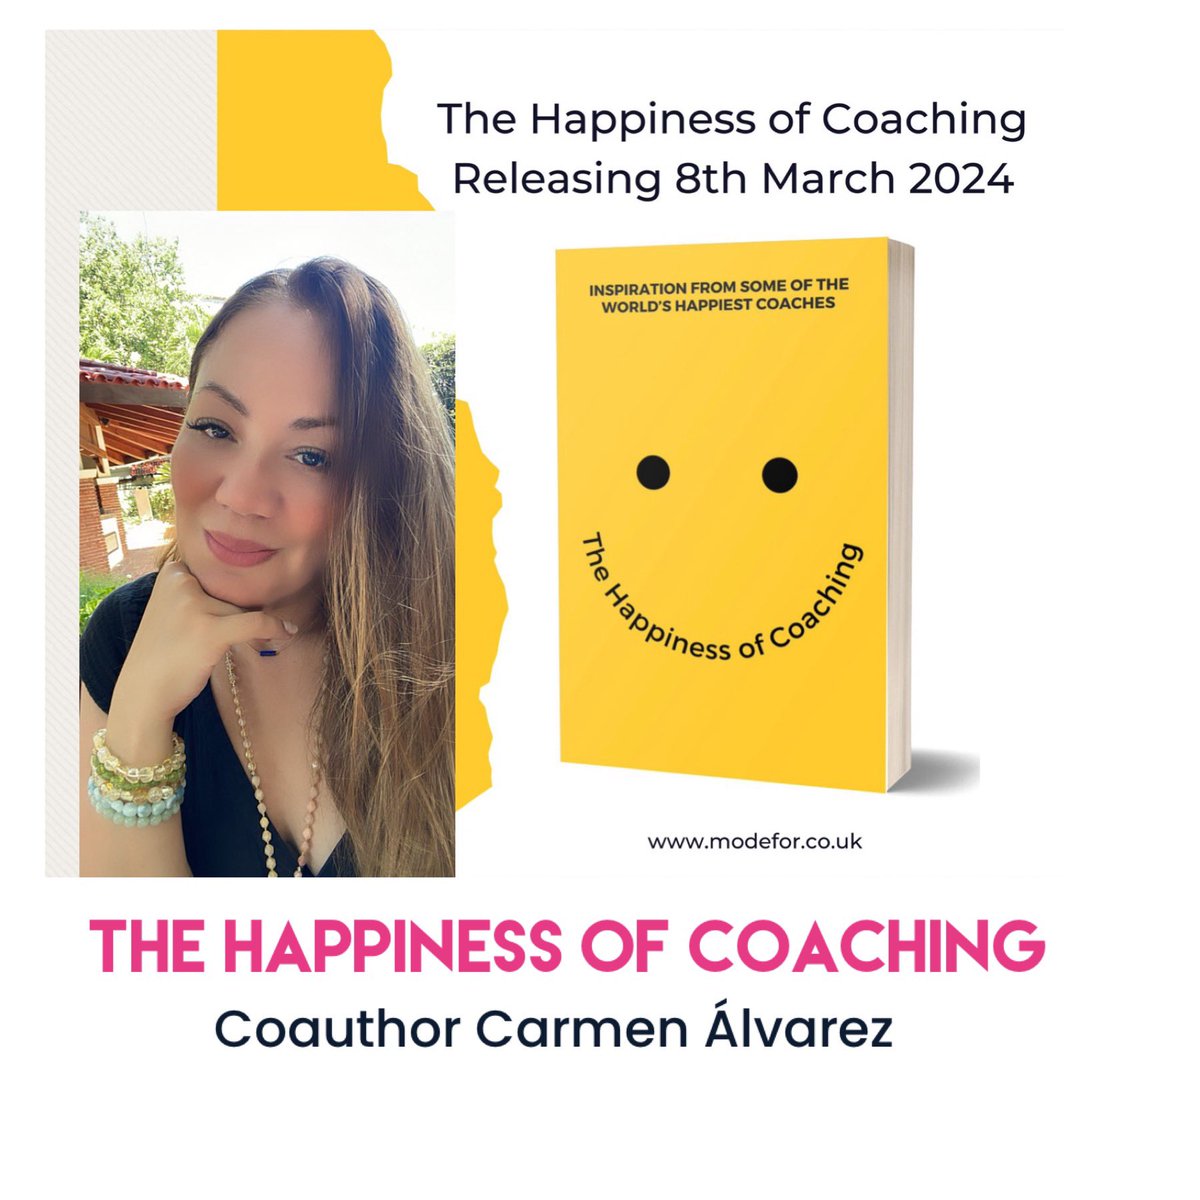 I'm incredibly honored to have co-authored this book alongside #wellbeing leaders from across the globe! Filled with insights & wisdom, the book demonstrates that behind every wellbeing leader, there is a story of personal transformation that ignited the desire to help others.